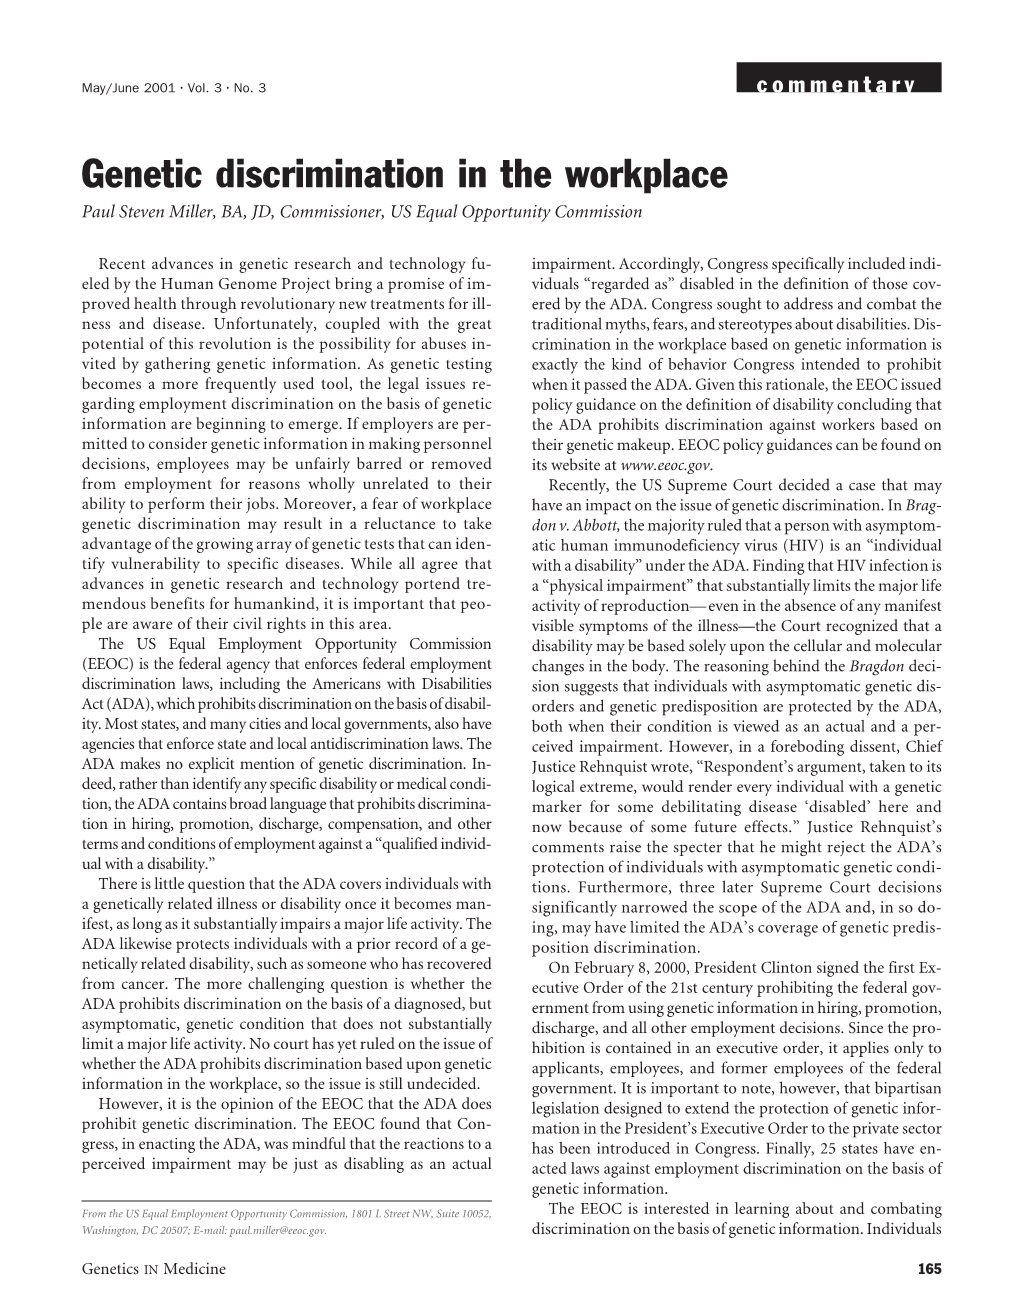 Genetic Discrimination in the Workplace Paul Steven Miller, BA, JD, Commissioner, US Equal Opportunity Commission